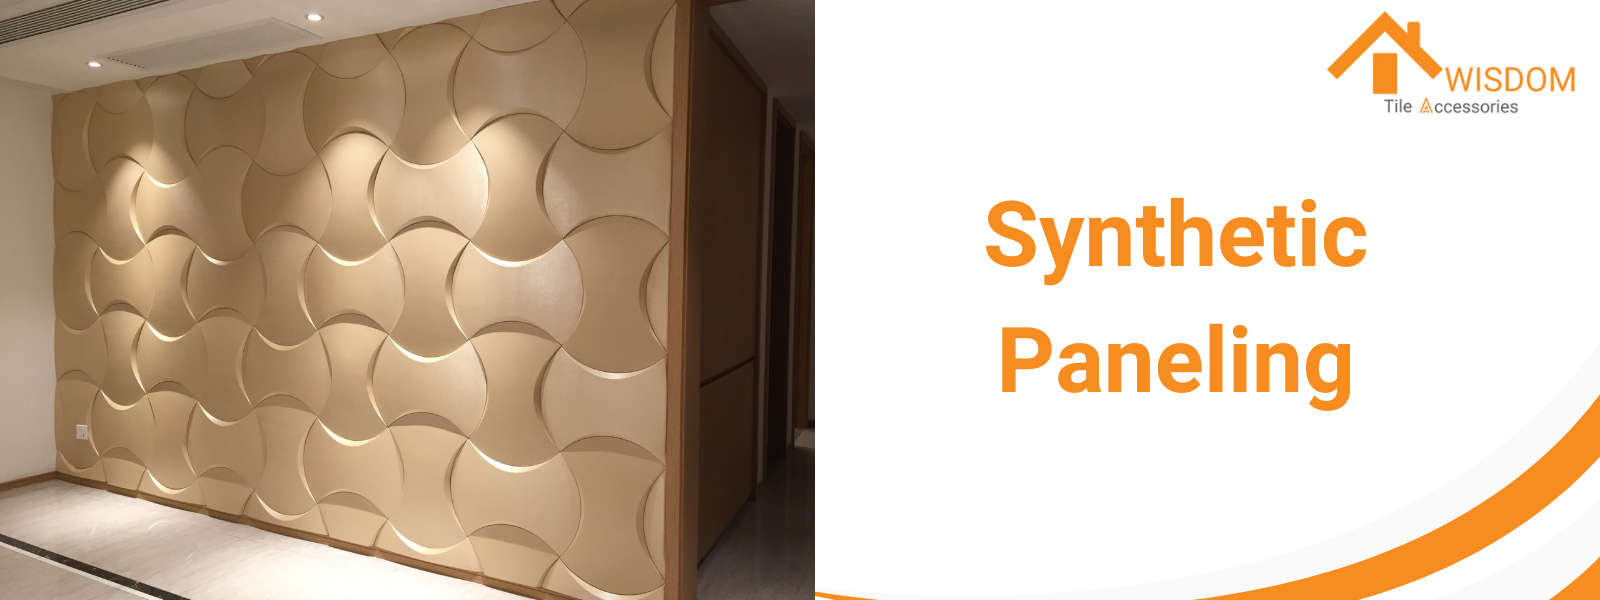 Synthetic Paneling